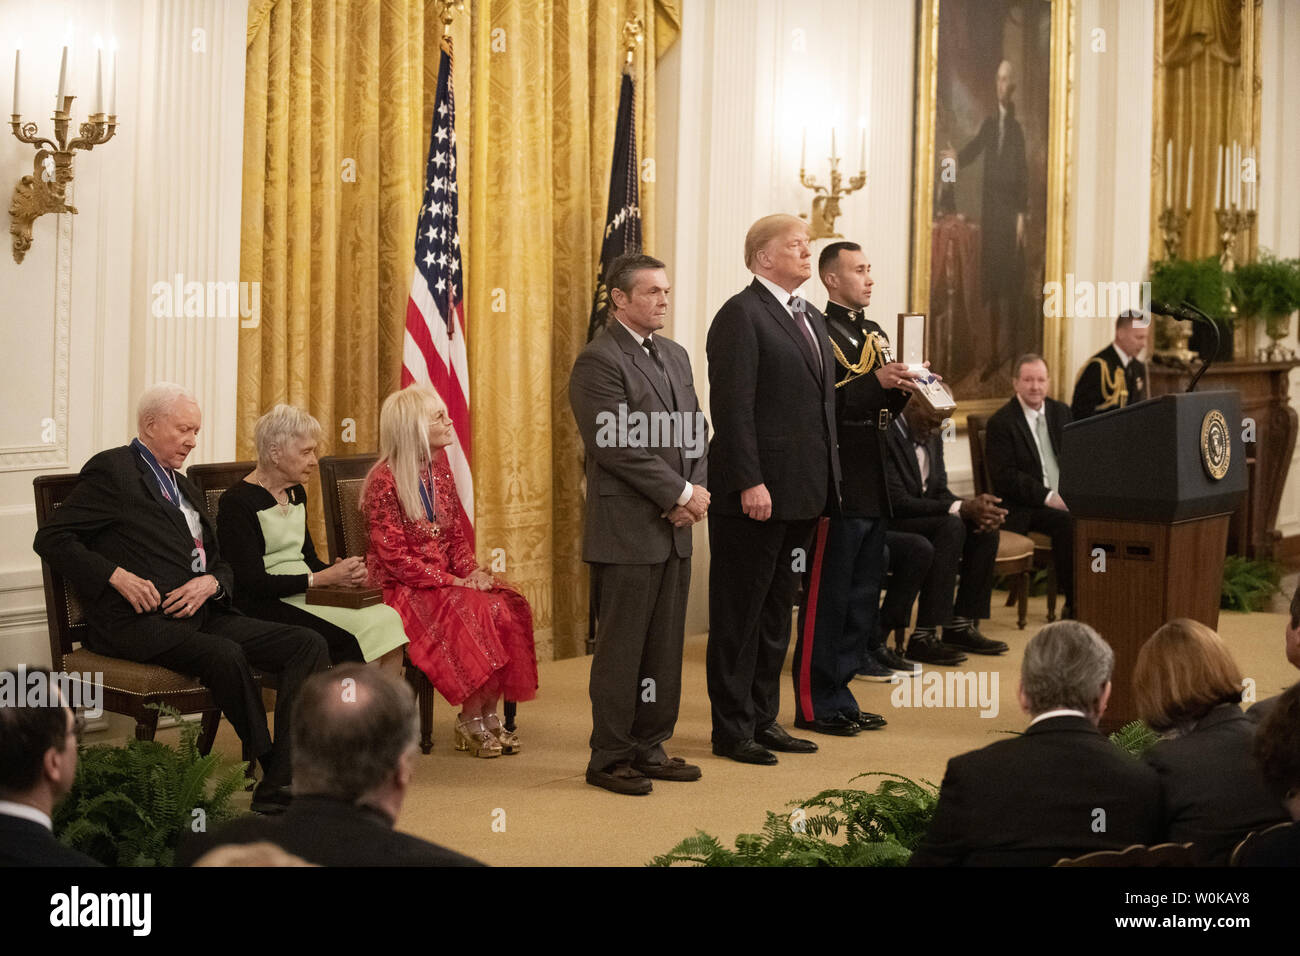 President Donald Trump awards the Medal of Freedom to seven Americans during a ceremony in the East room of the White House in Washington, D.C. on November 16, 2018. Photo by Pat Benic/UPI Stock Photo